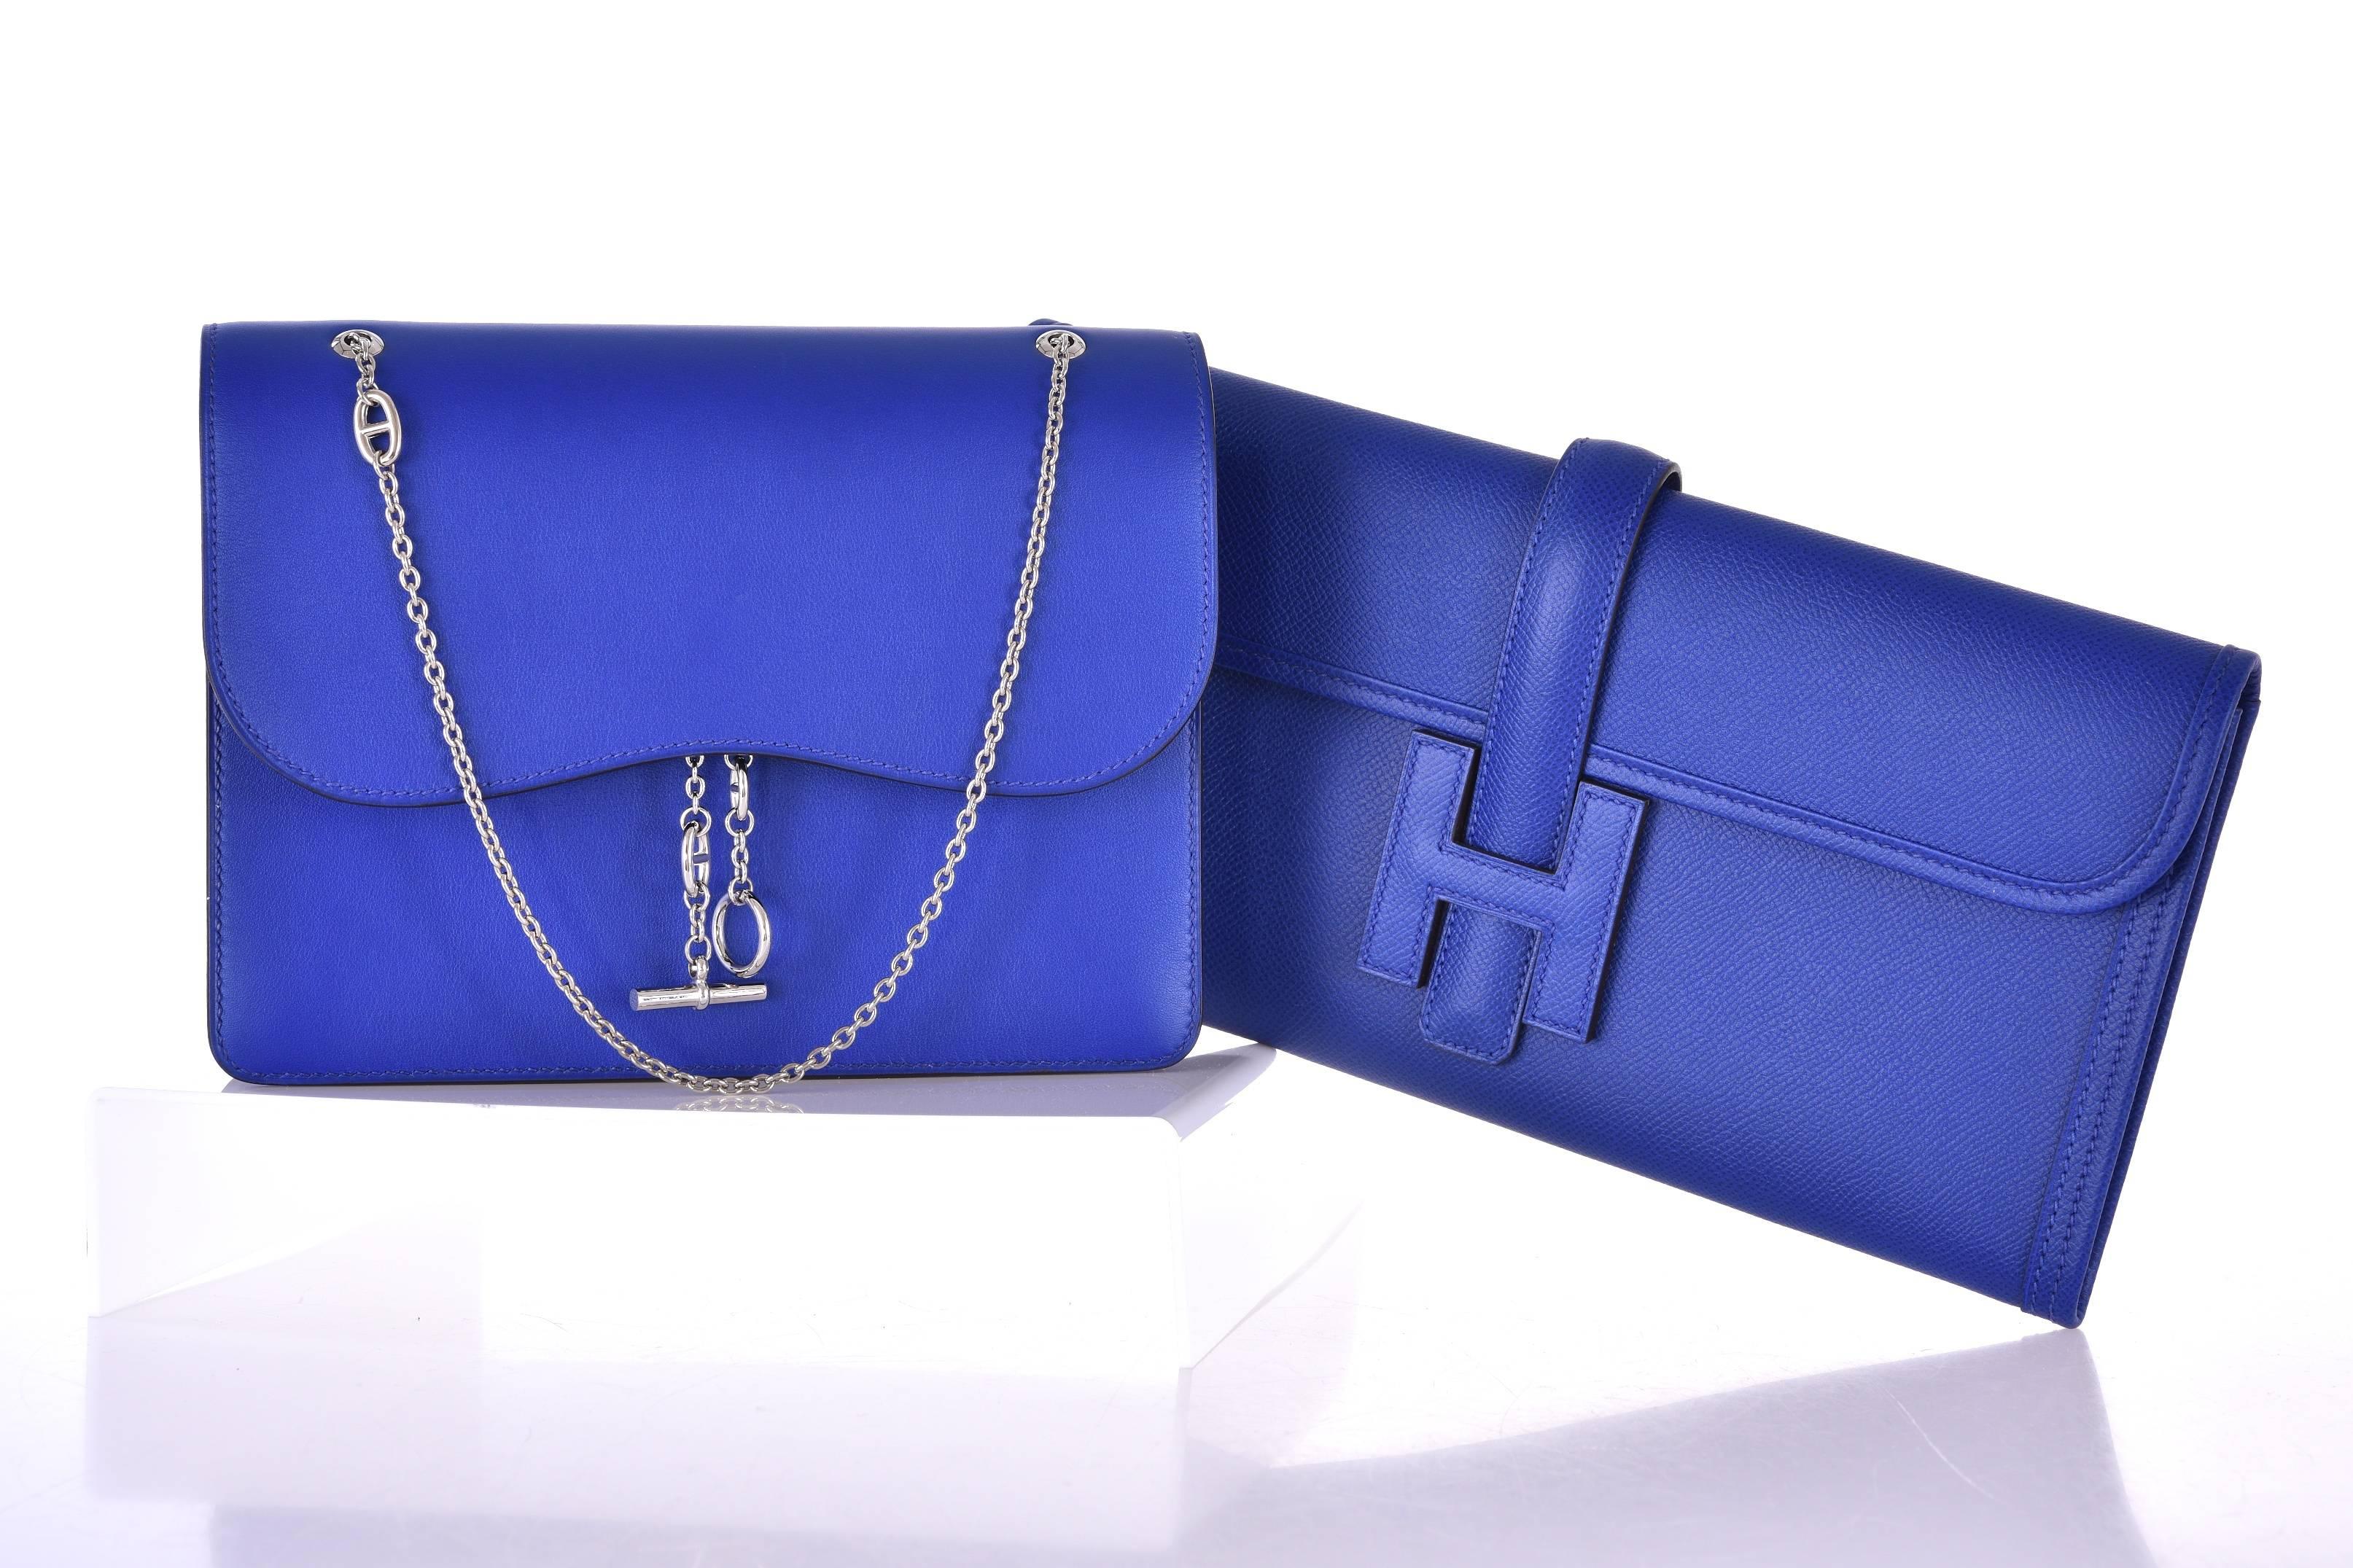 Hermes Catenina Bag Clutch Blue Electric Gorgeous New Bag! JaneFinds 3